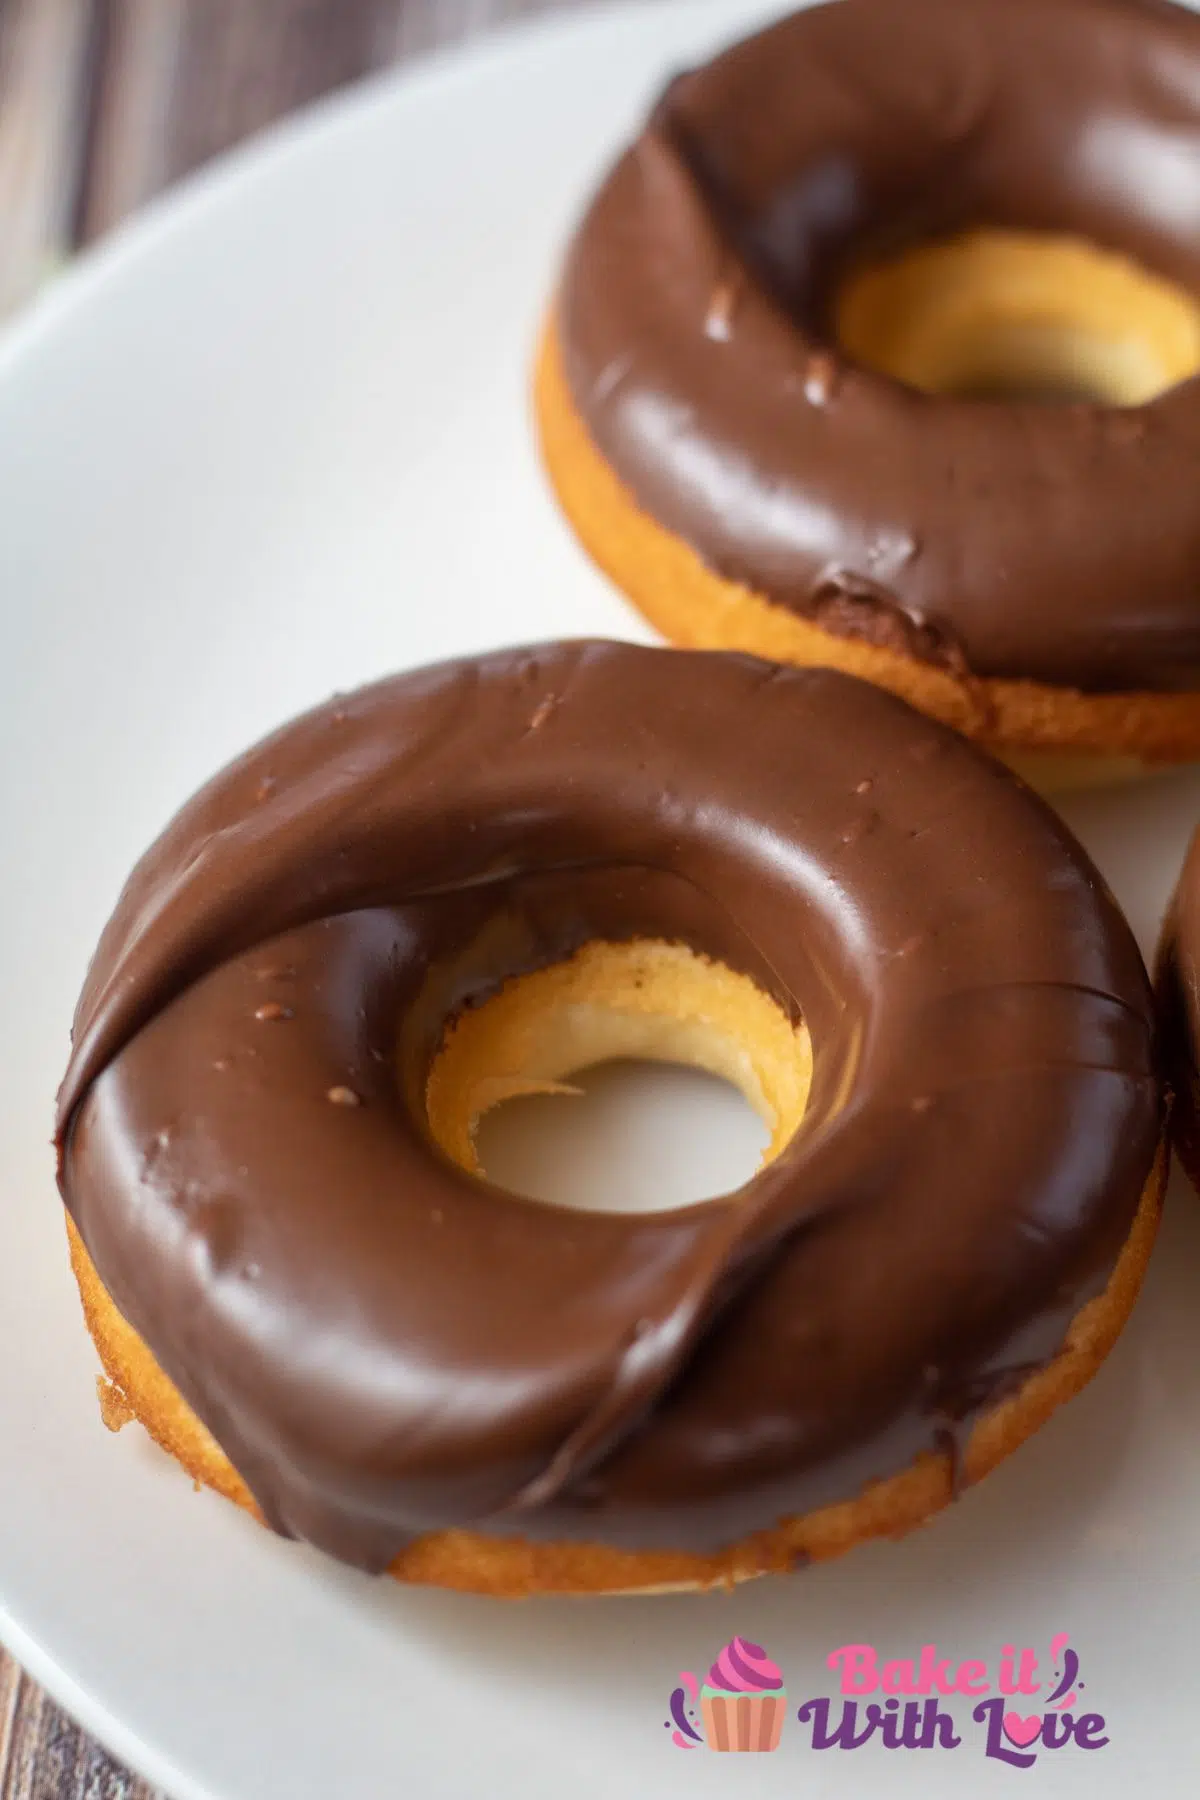 Tall image showing two donuts with chocolate icing.